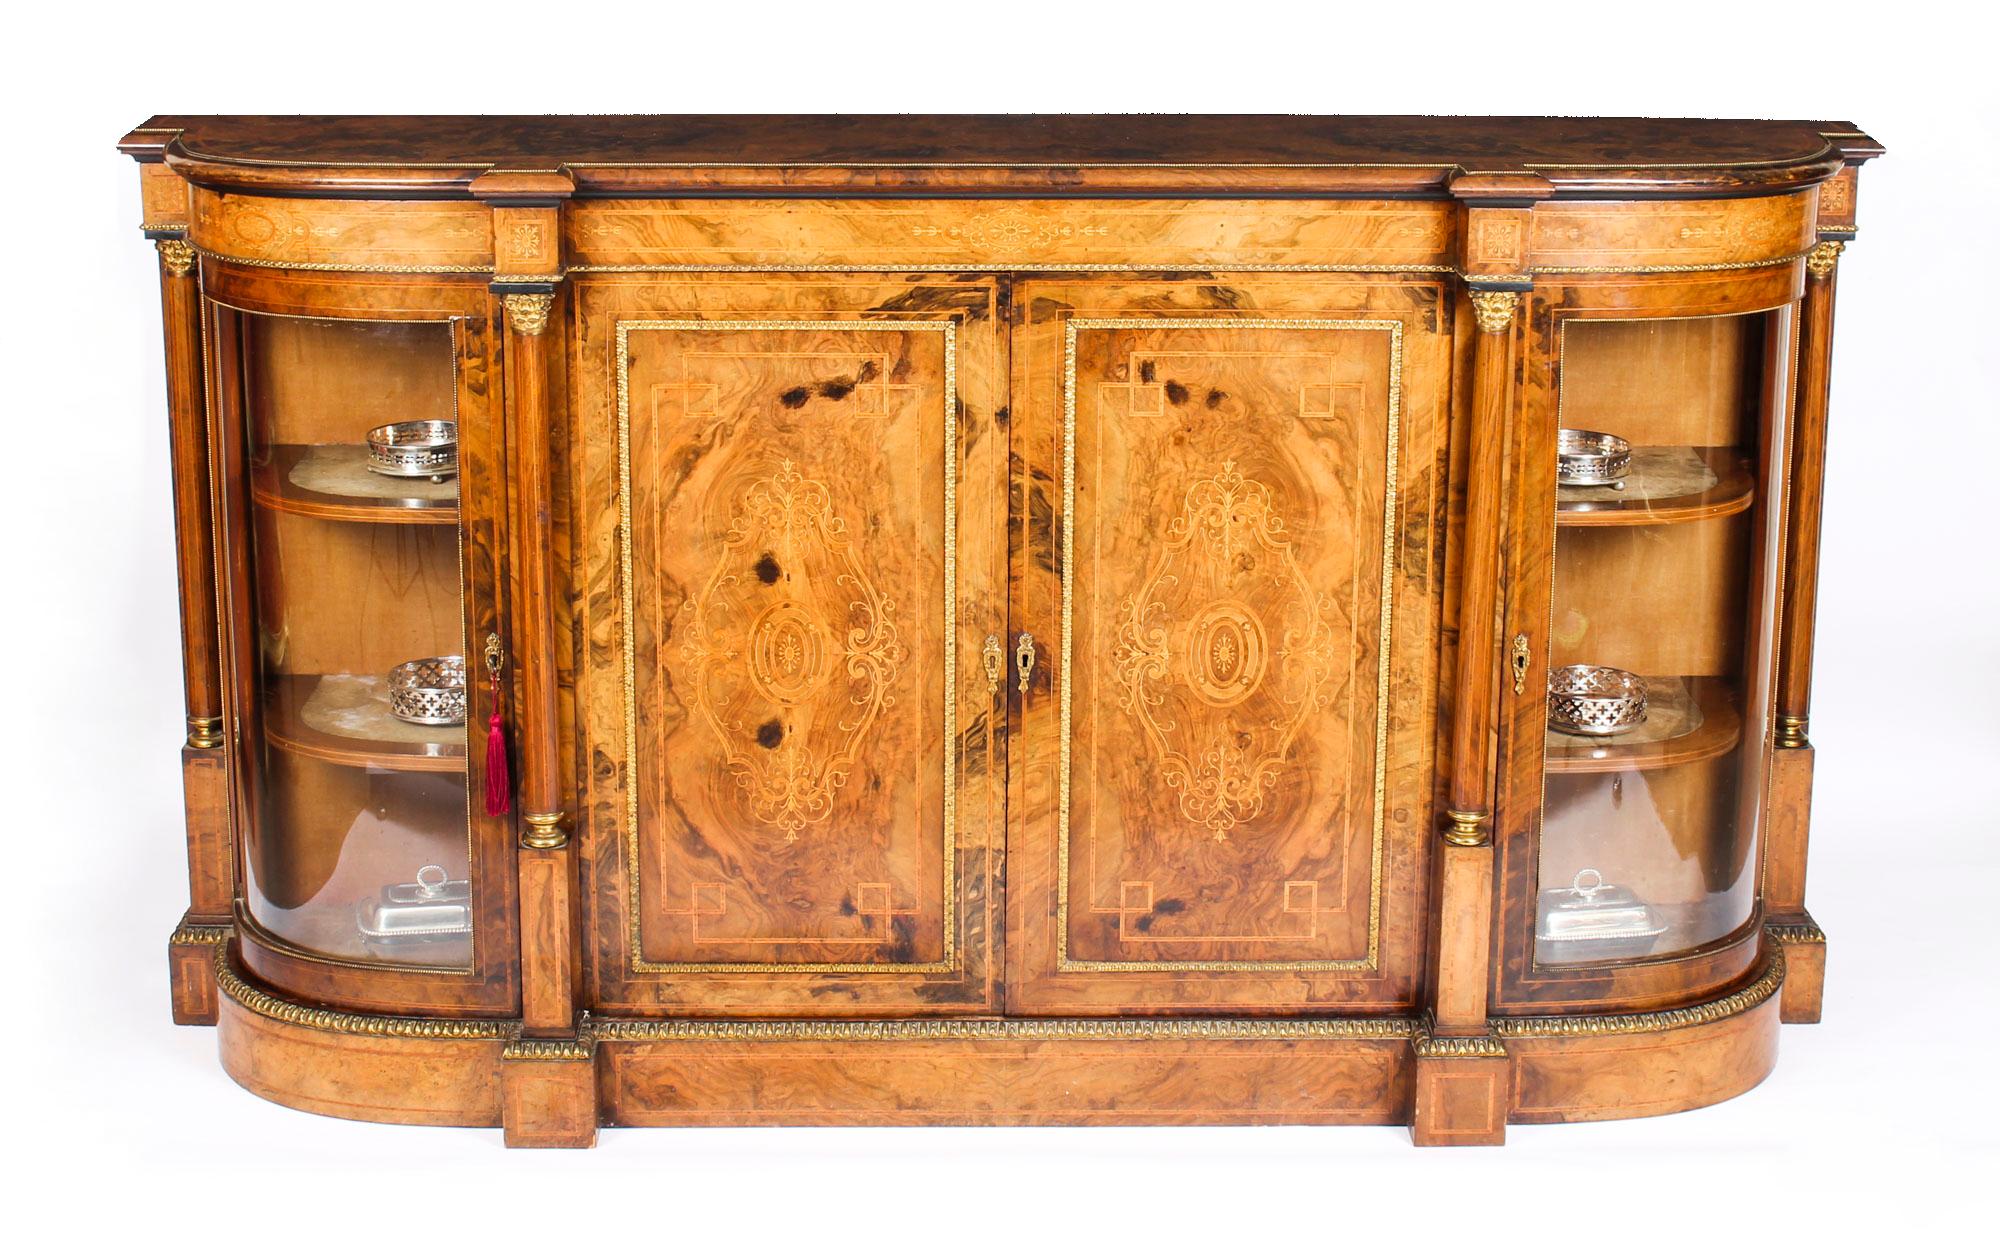 This is a superb quality antique Victorian burr walnut and inlaid credenza, circa 1860 in date.

The entire piece highlights the unique and truly exceptional pattern of the burr walnut extremely well and the walnut is complimented by the elegant